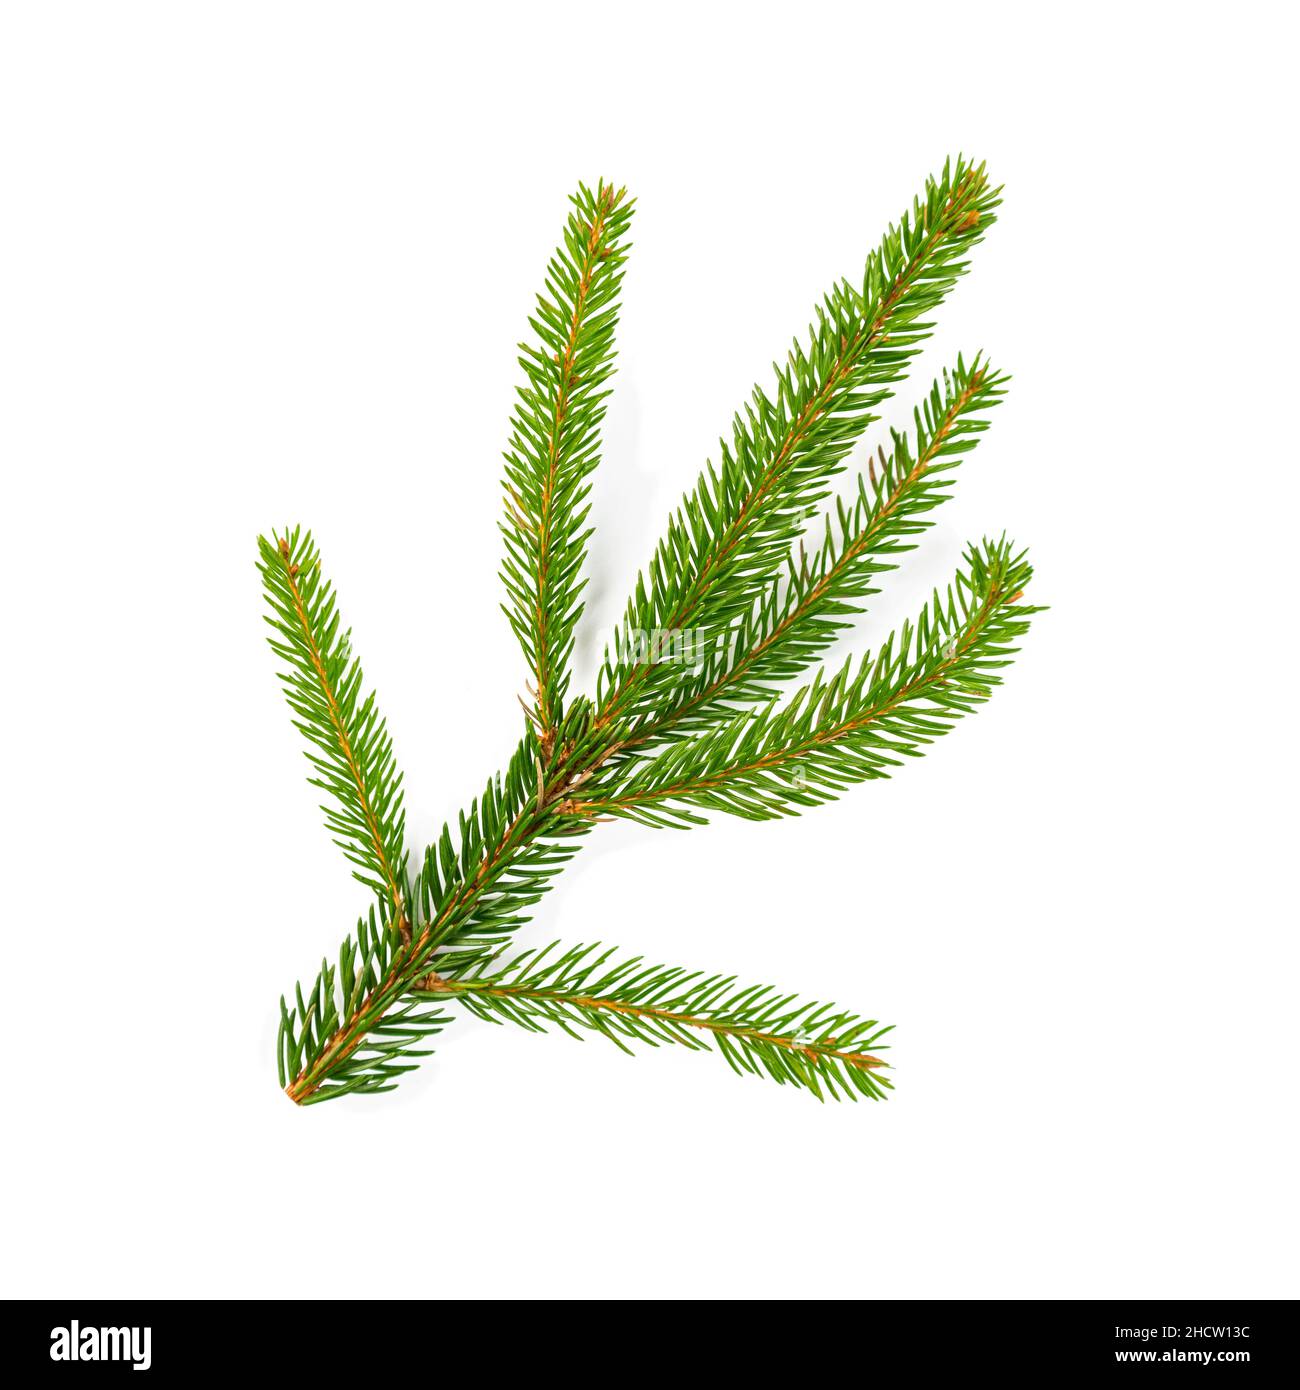 Green lush spruce branch. Fir branches on white background Stock Photo